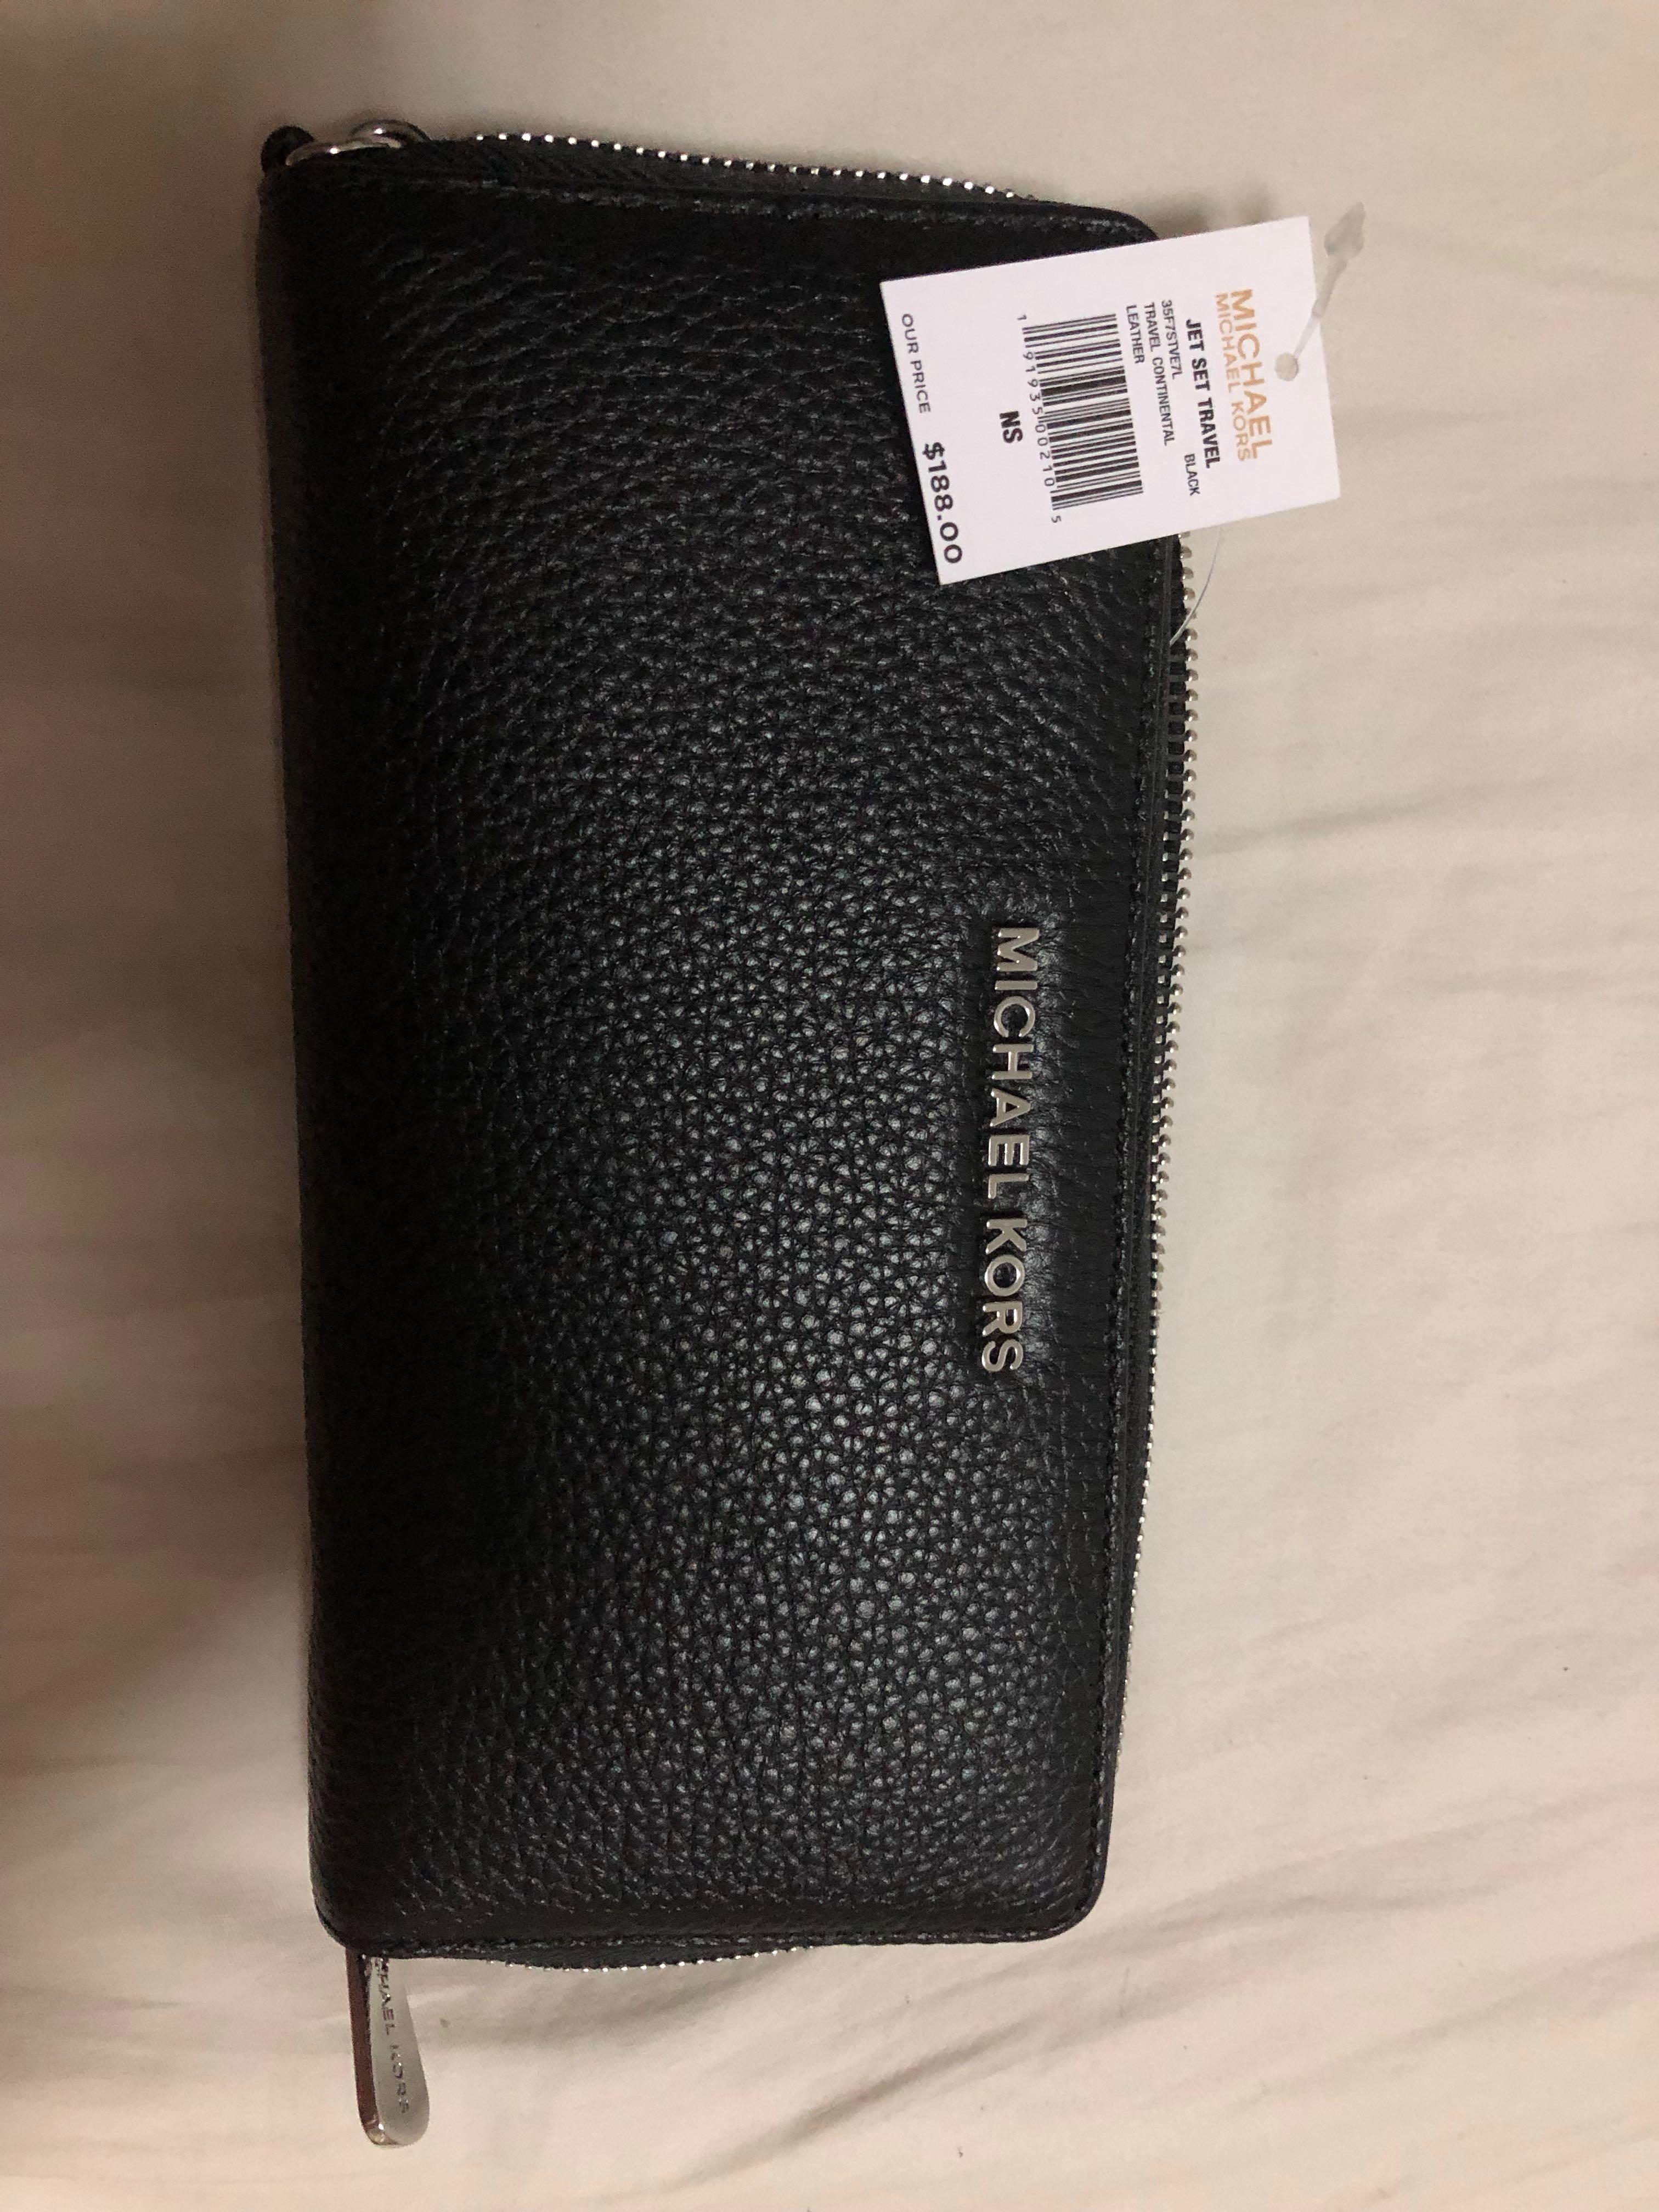 michael kors wallet outlet price